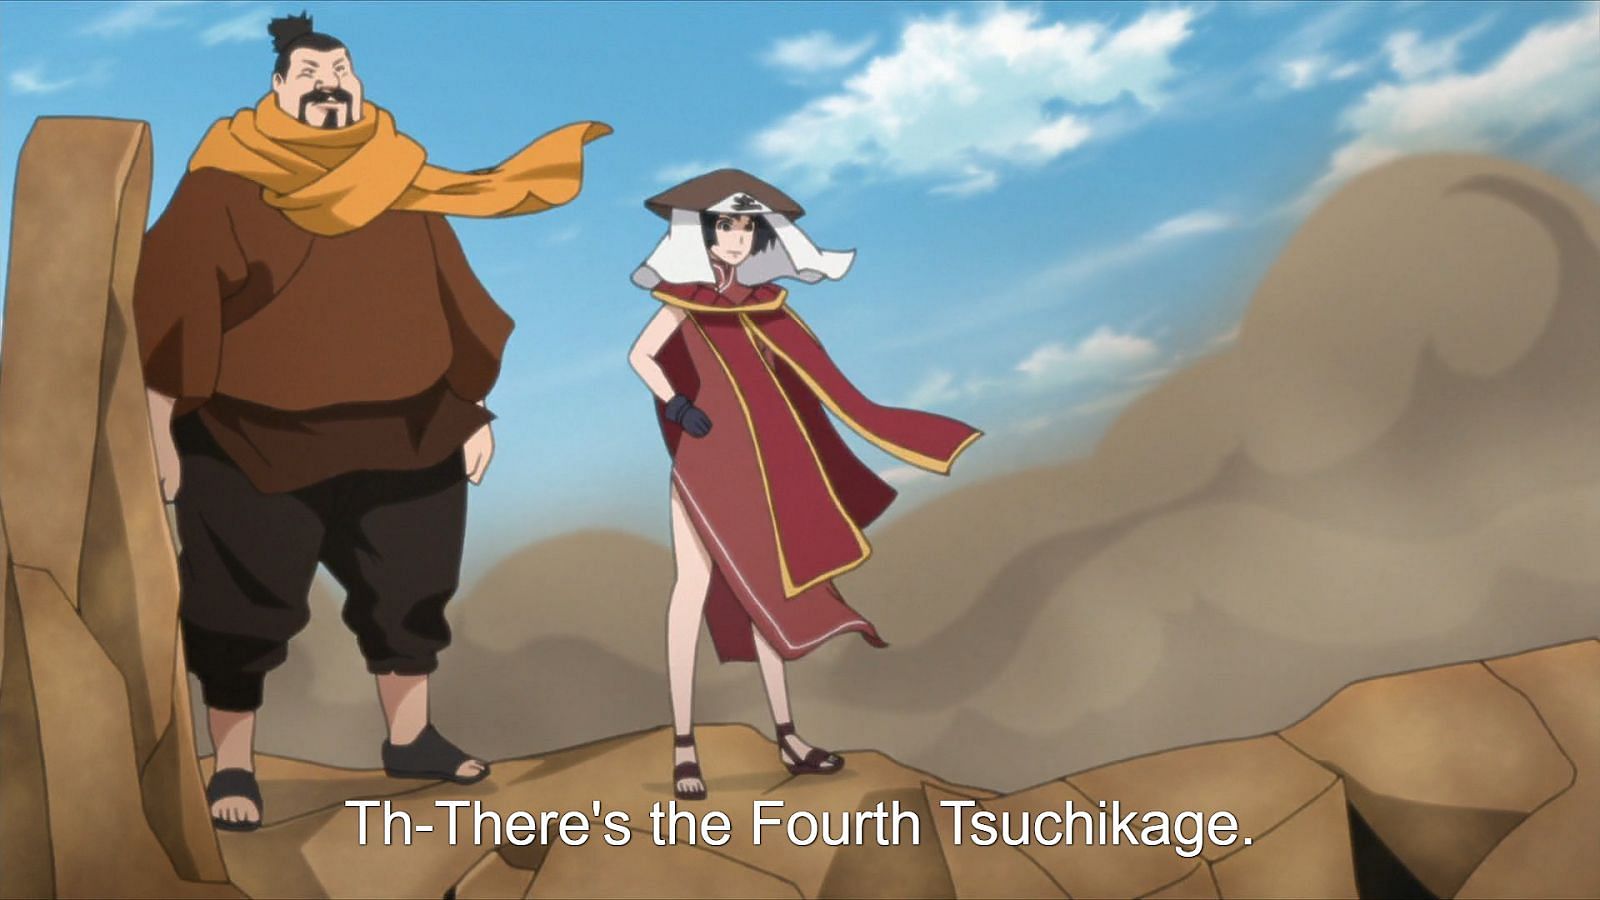 How come Kurotsuchi became Tsuchikage and not her father? - Quora